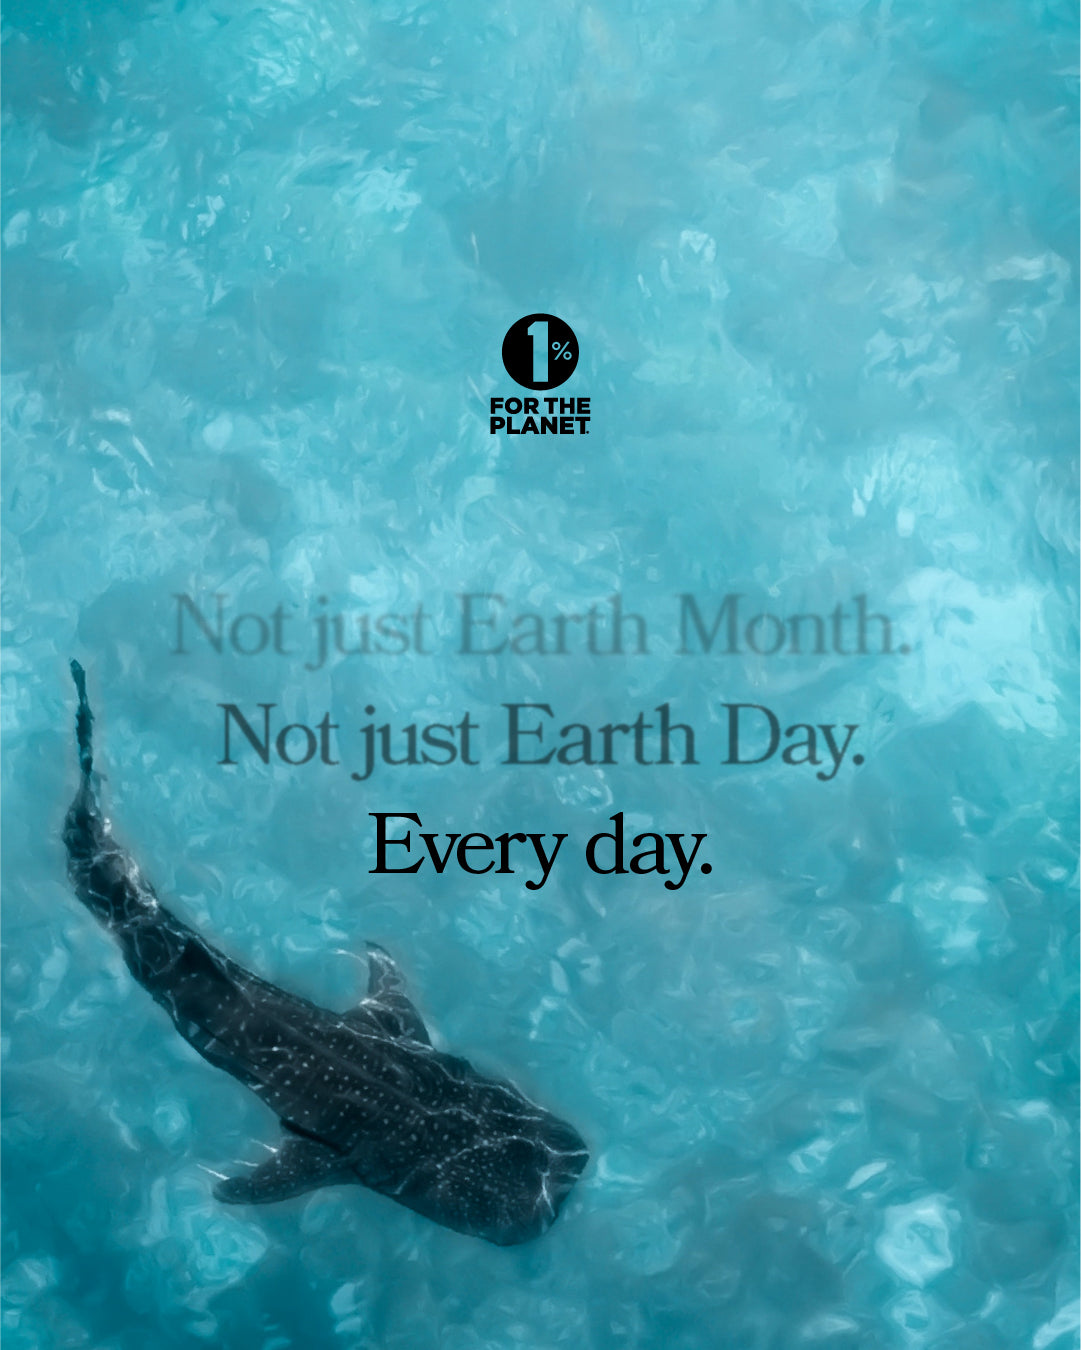 A photo of a swimming shark with the text: Not just Earth Month. Not just Earth Day. Every day. From 1% for the Planet